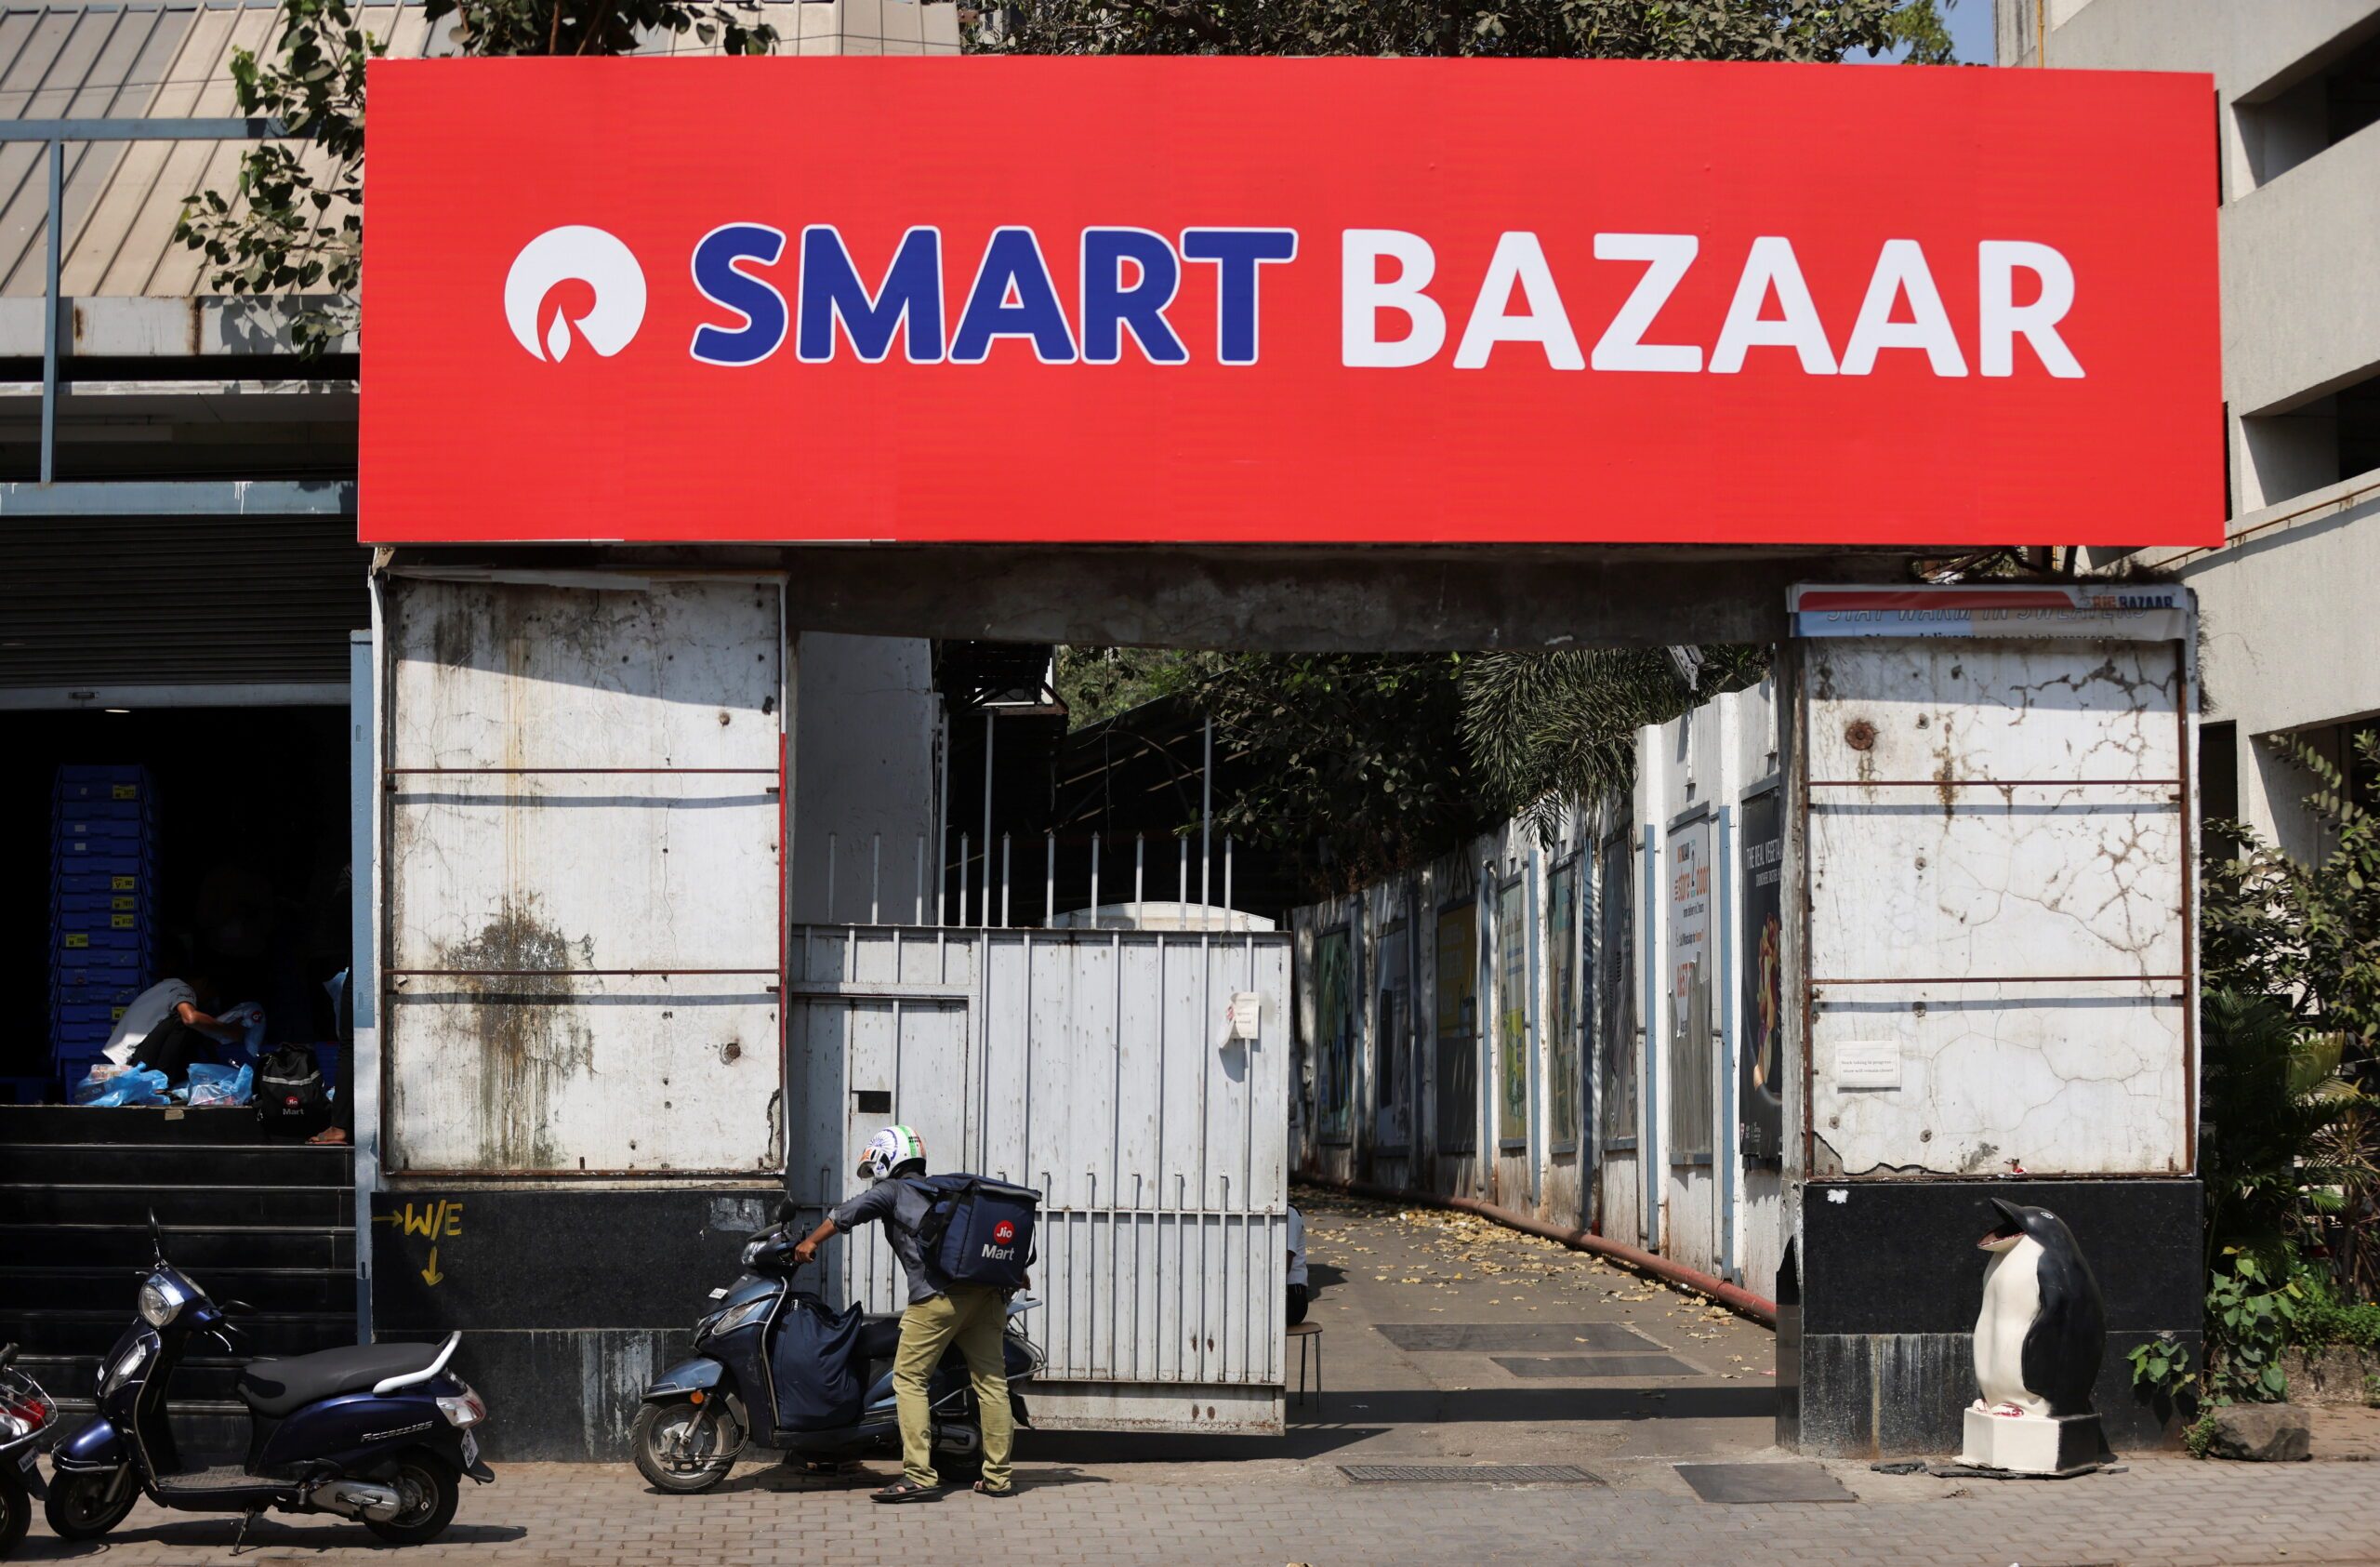 A Reliance Smart Bazaar retail store in Mumbai. The company has nearly doubled its valuation to $100 billion from its last funding round in 2020